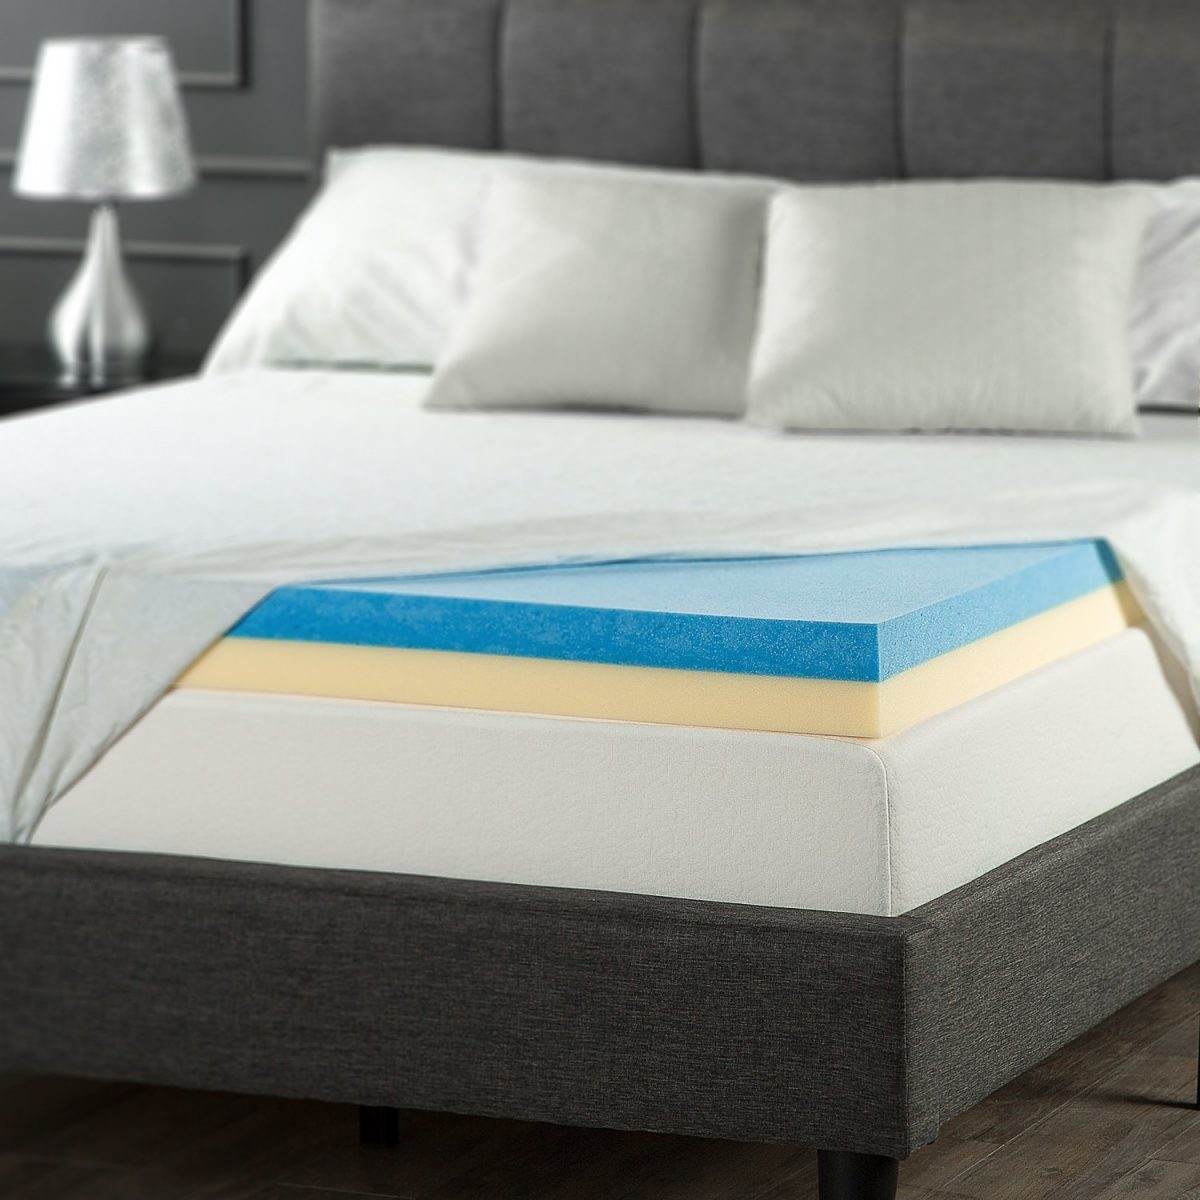 what is in a cooling mattress pads bad for you